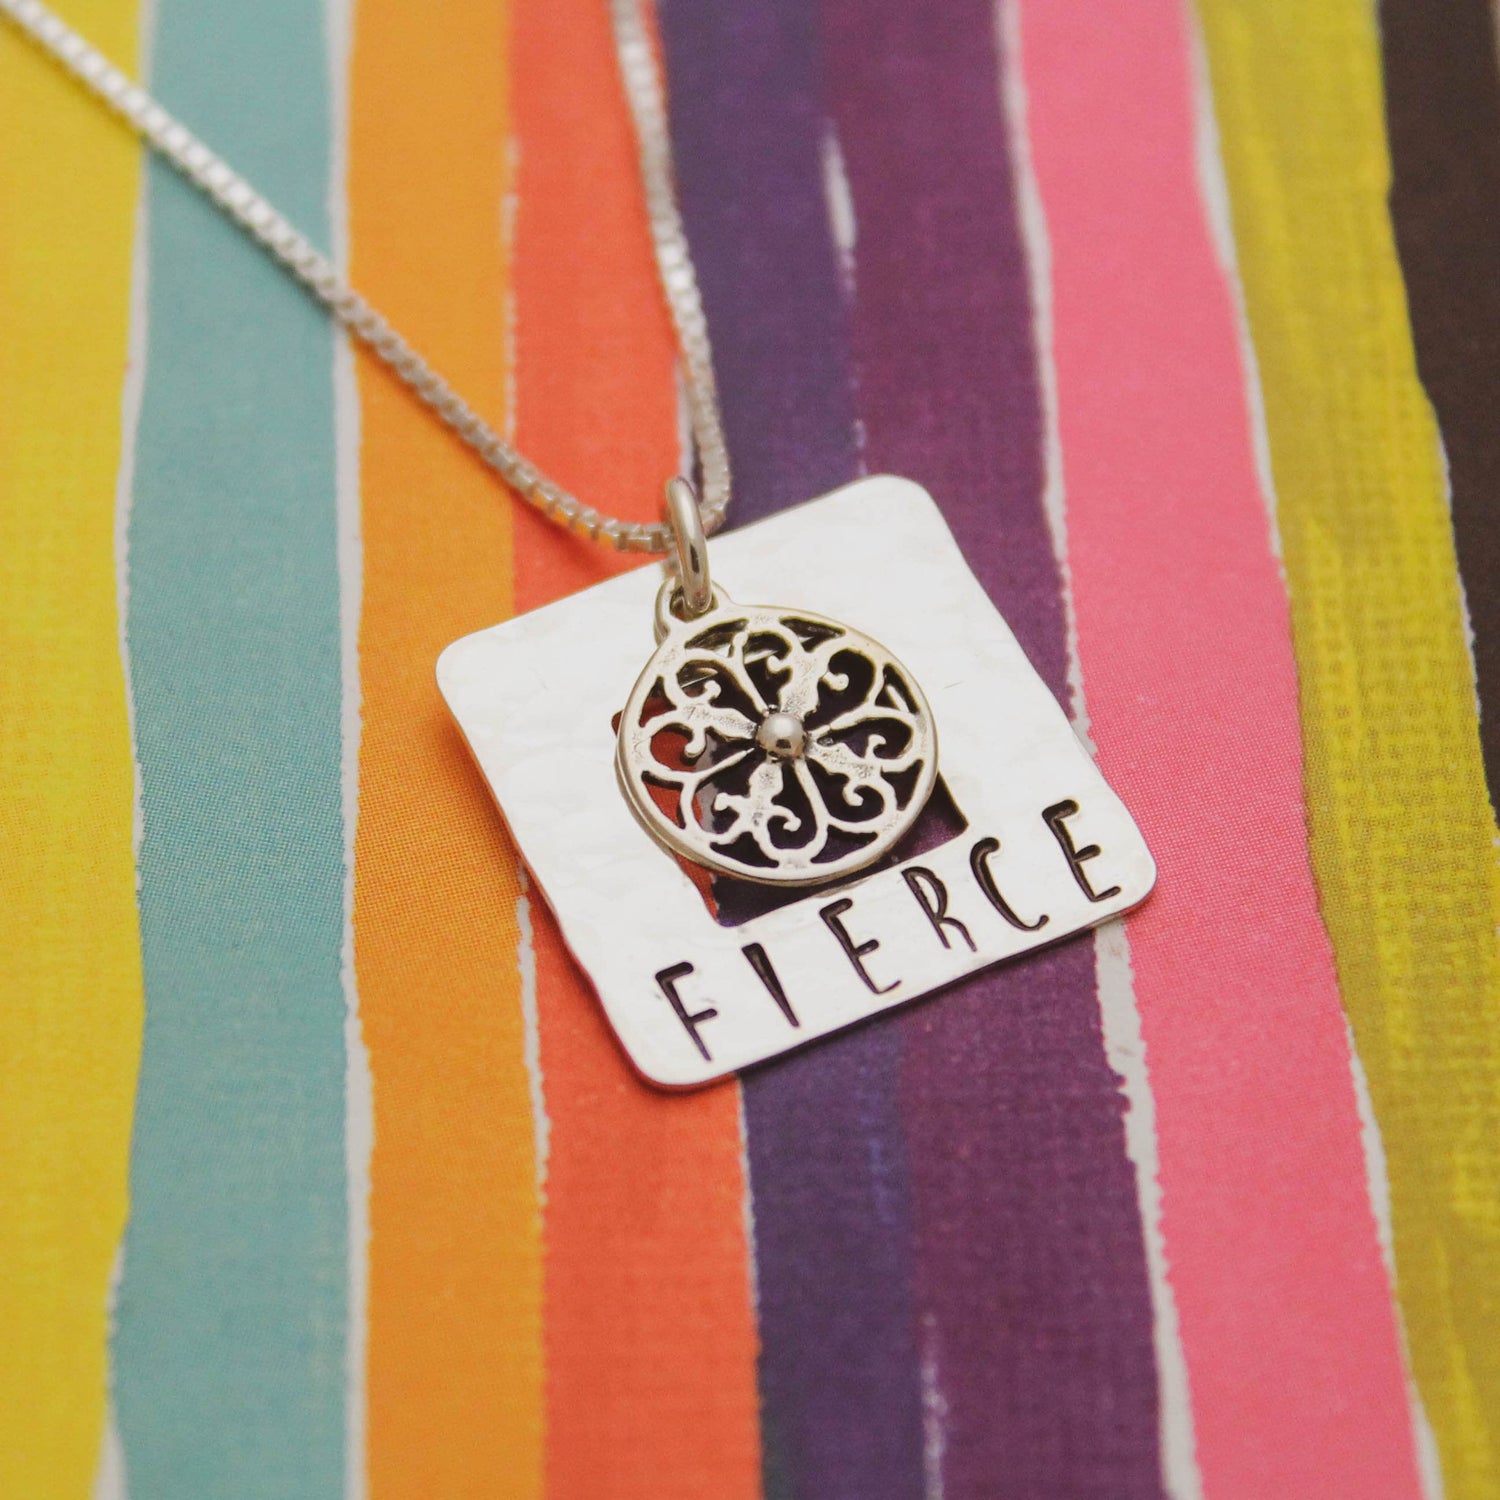 FIERCE Necklace, Mandala Necklace, Sterling Silver Hand Stamped Jewelry, Custom Motivational Inspirational Gift for Her, Fierce Gift